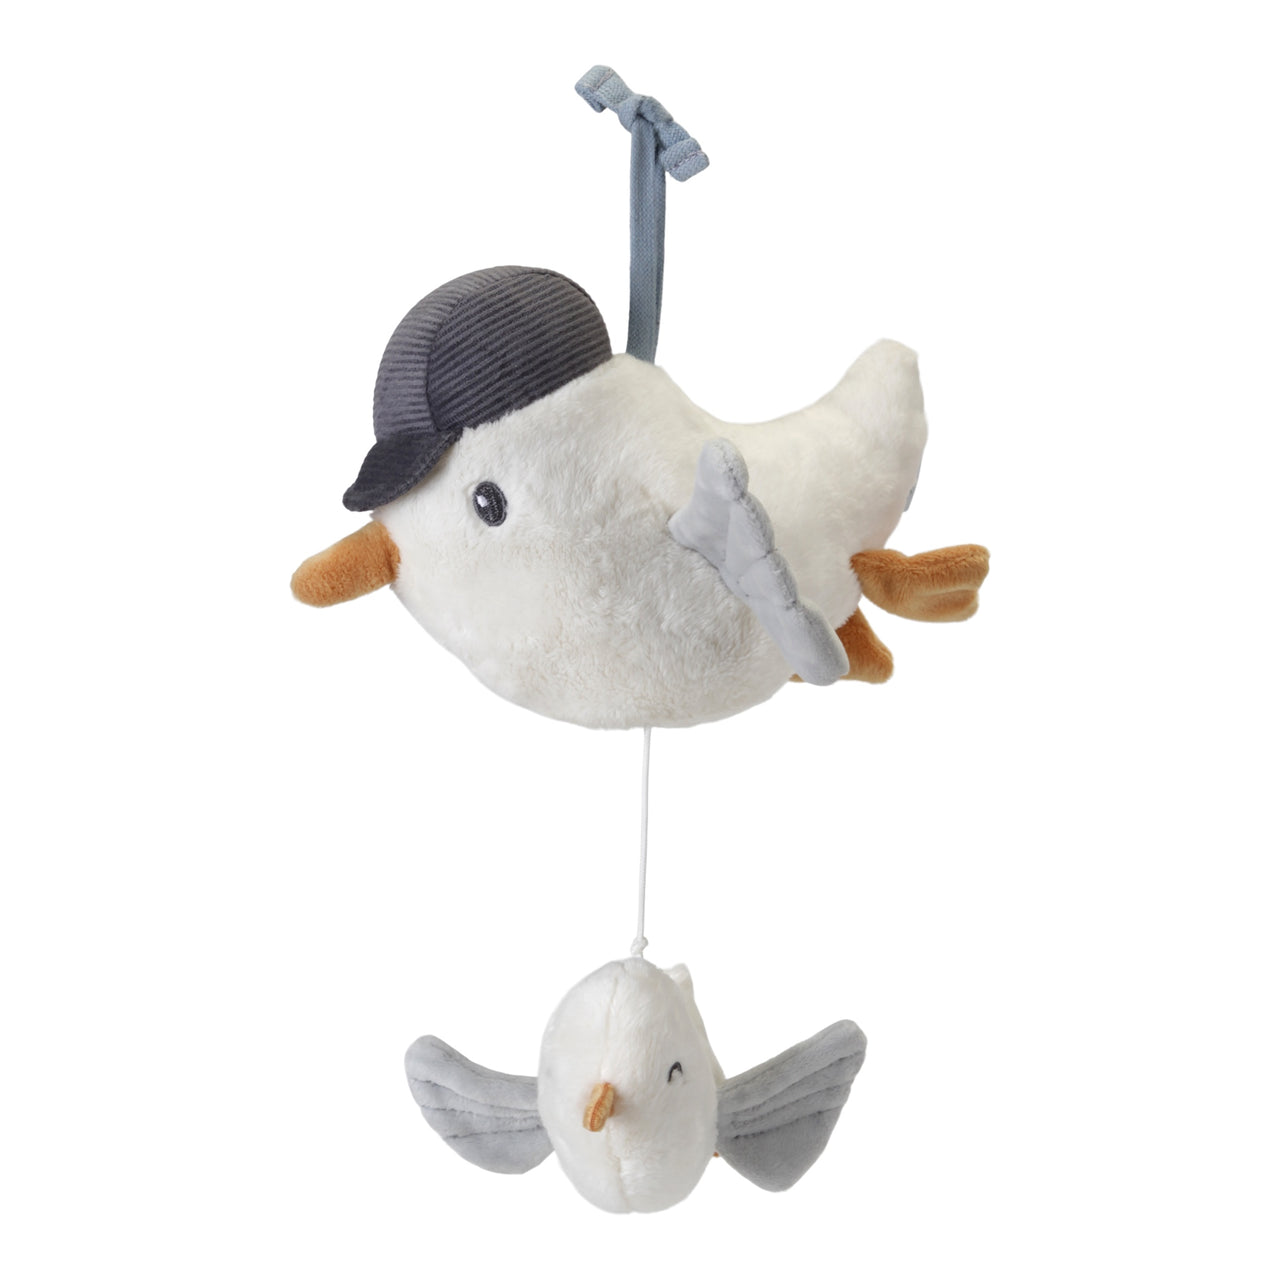 Sleep mode switched on. This seagull-shaped music box has a calming effect on little ones. Pull down the baby seagull to play a soothing melody. The lullaby has a calming effect on your child. This music box doubles as eye-catching decoration for the nursery and makes for a surprising maternity gift that new parents will definitely appreciate.